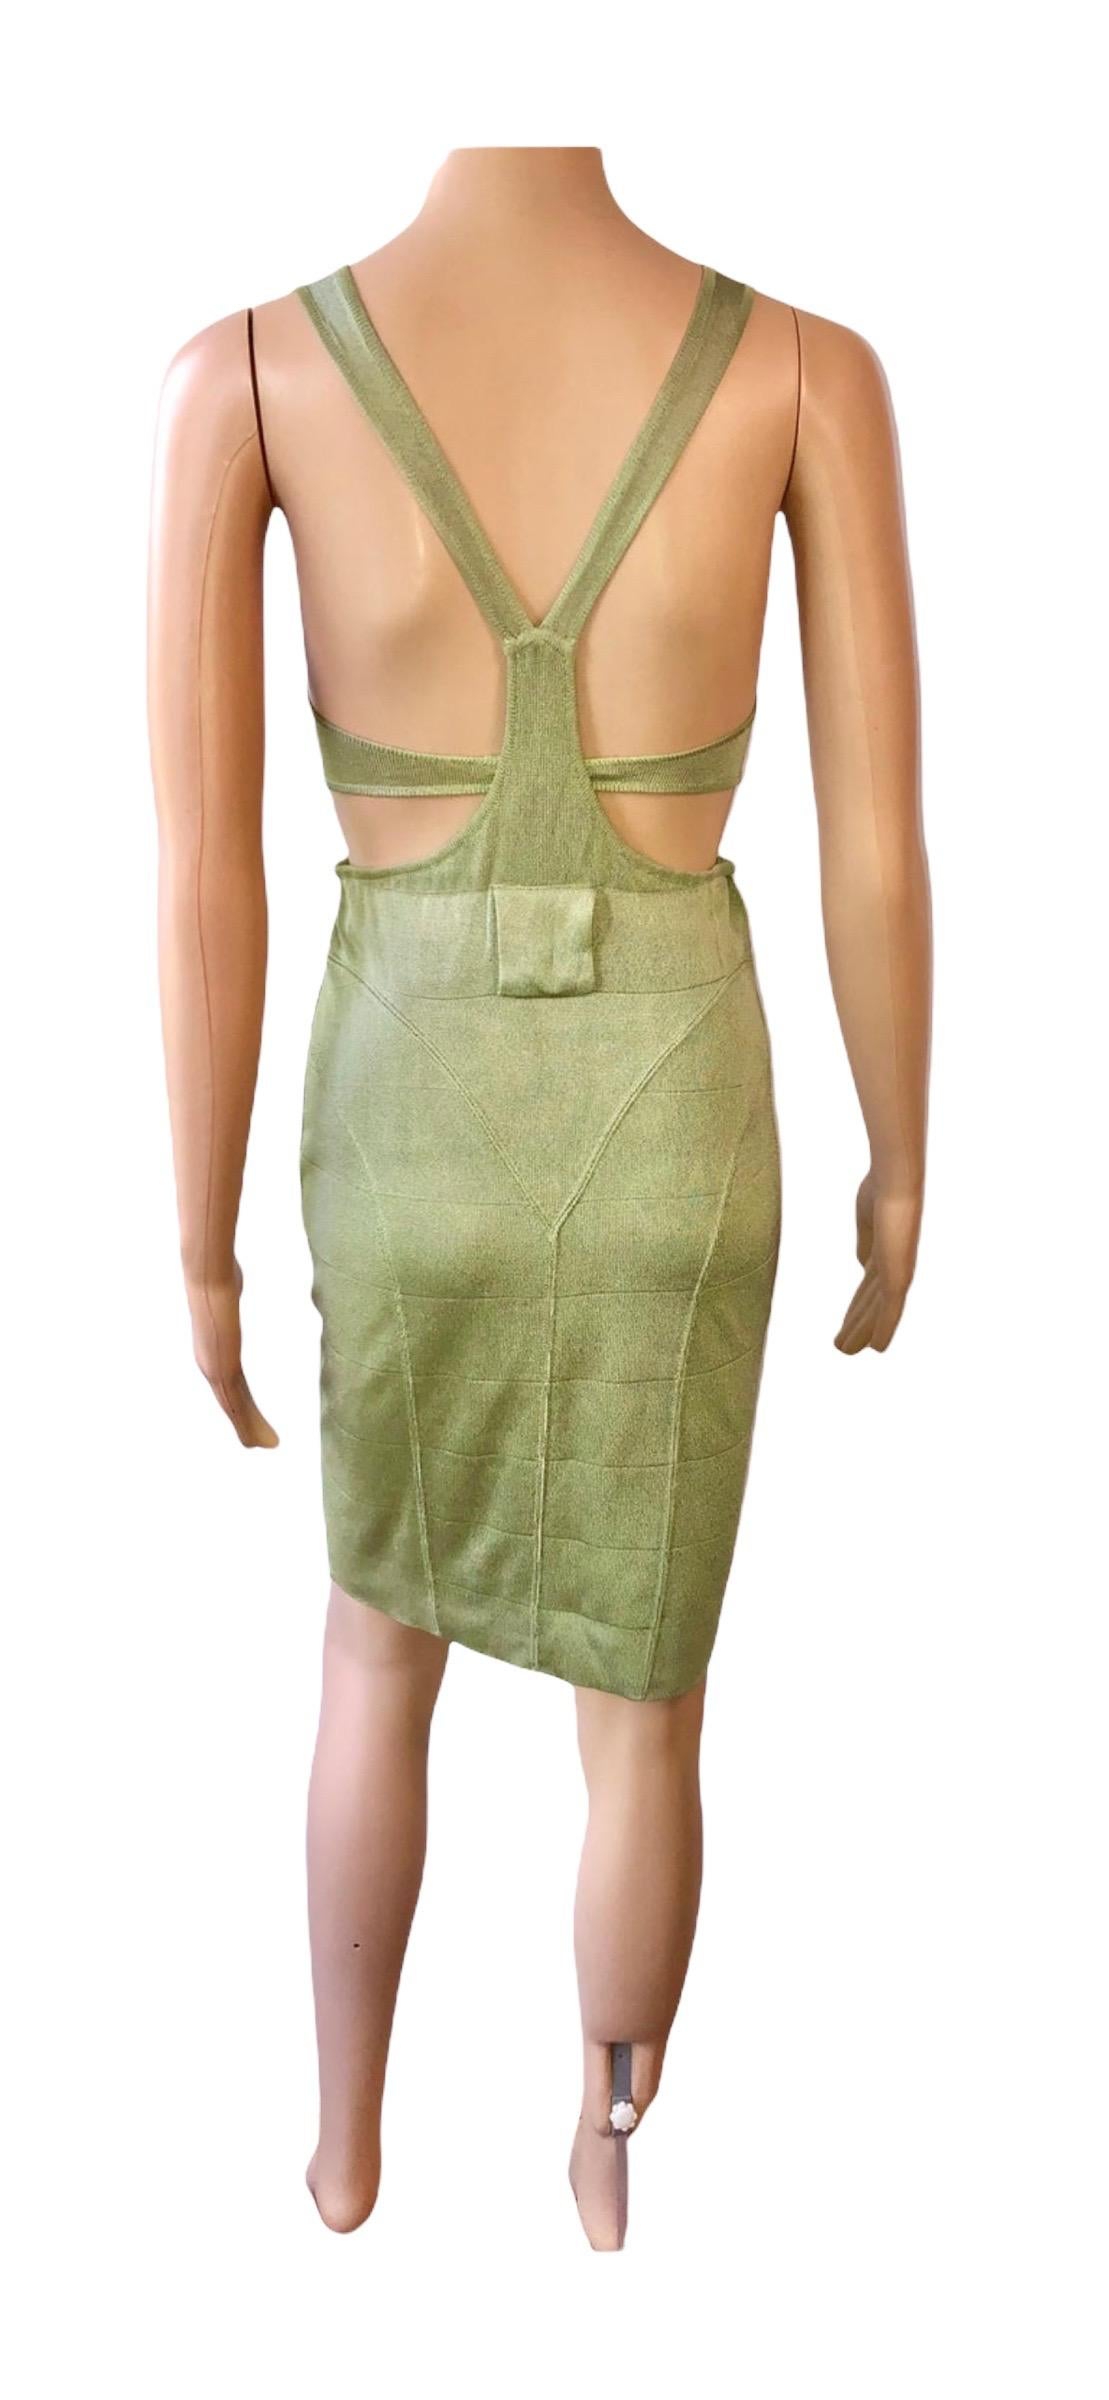 Azzedine Alaia S/S 1985 Vintage Plunged Cutout Bodycon Green Dress For Sale 3